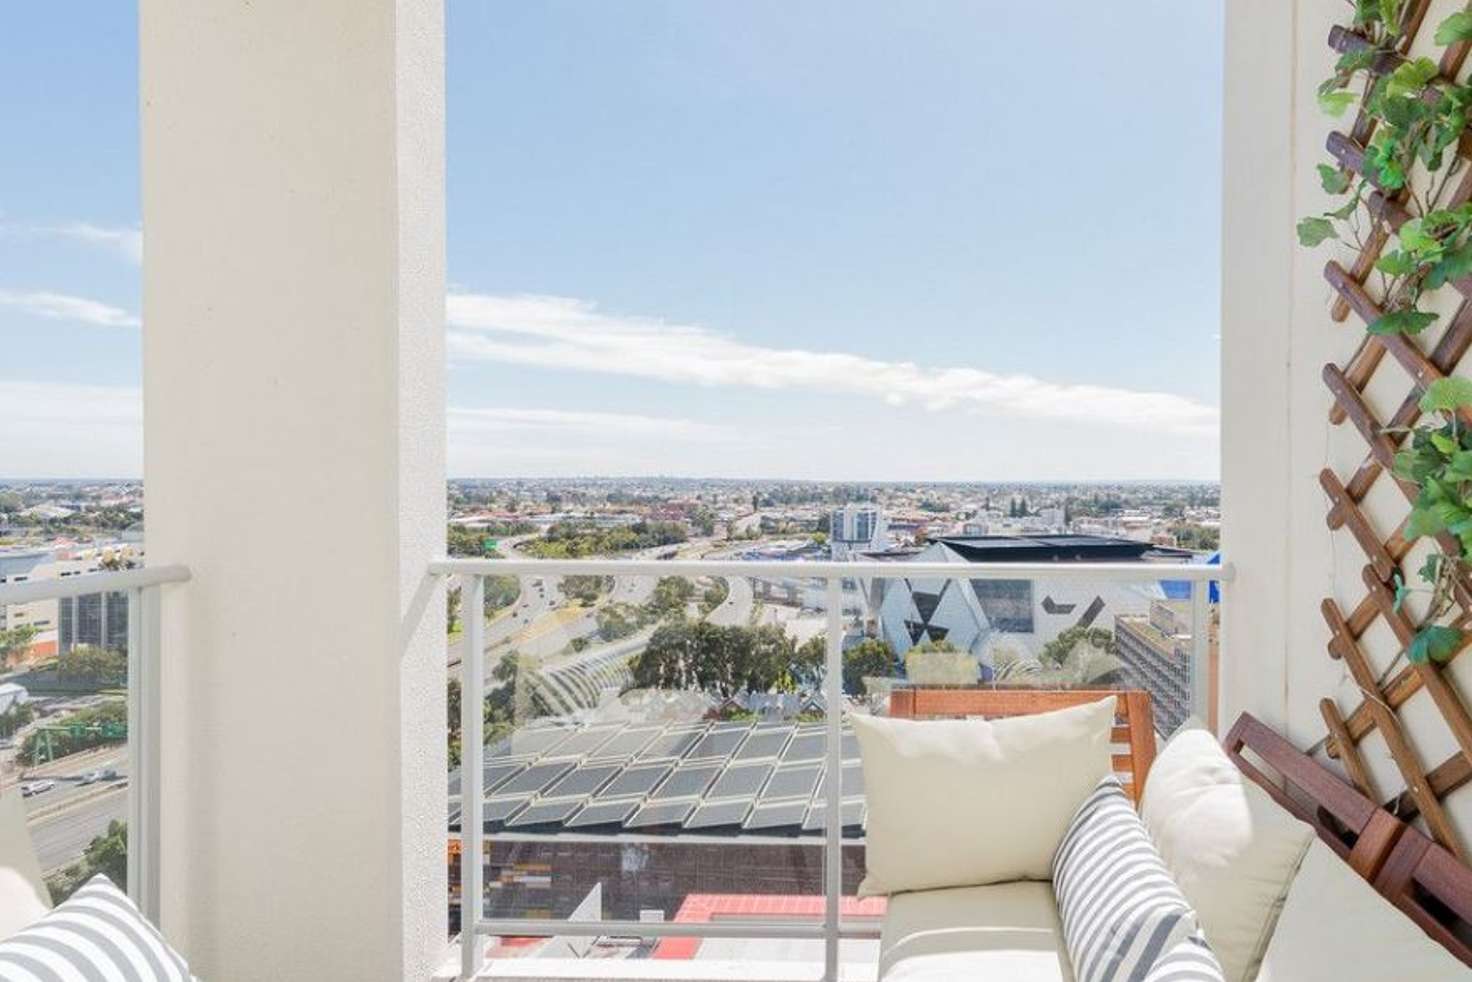 Main view of Homely apartment listing, 115/996 Hay Street, Perth WA 6000